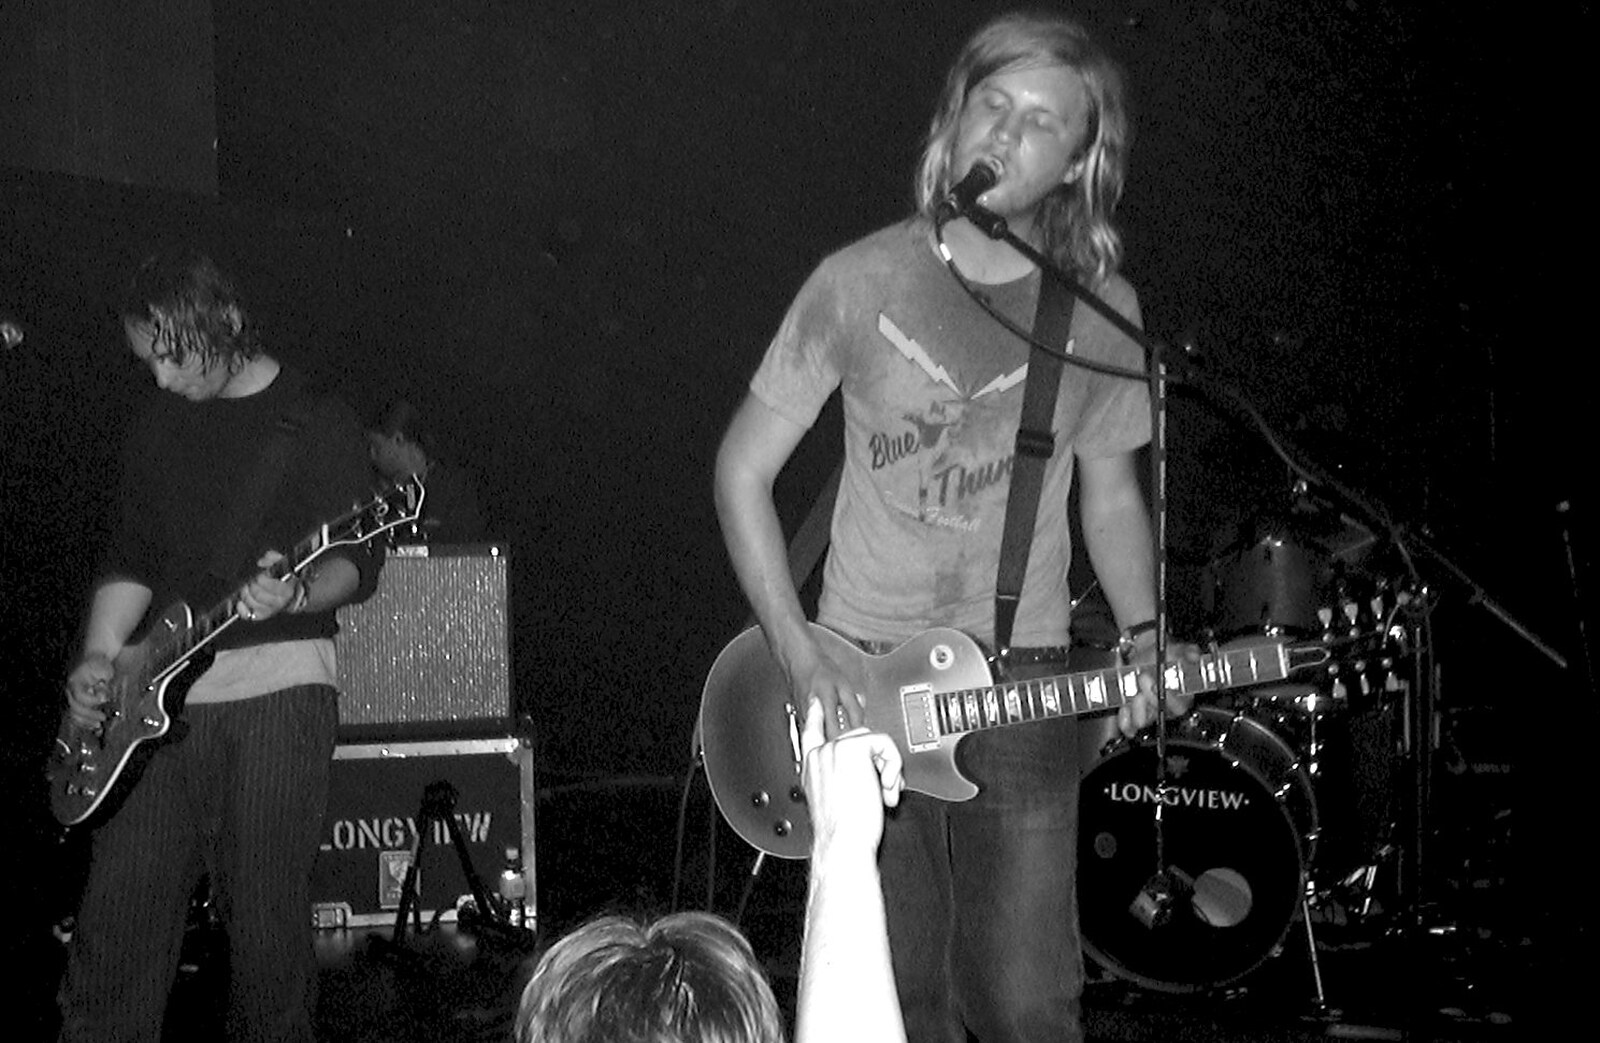 Doug Morch on rhythm guitar from Longview and The BBs, Norwich and Banham, Norfolk - 4th July 2003